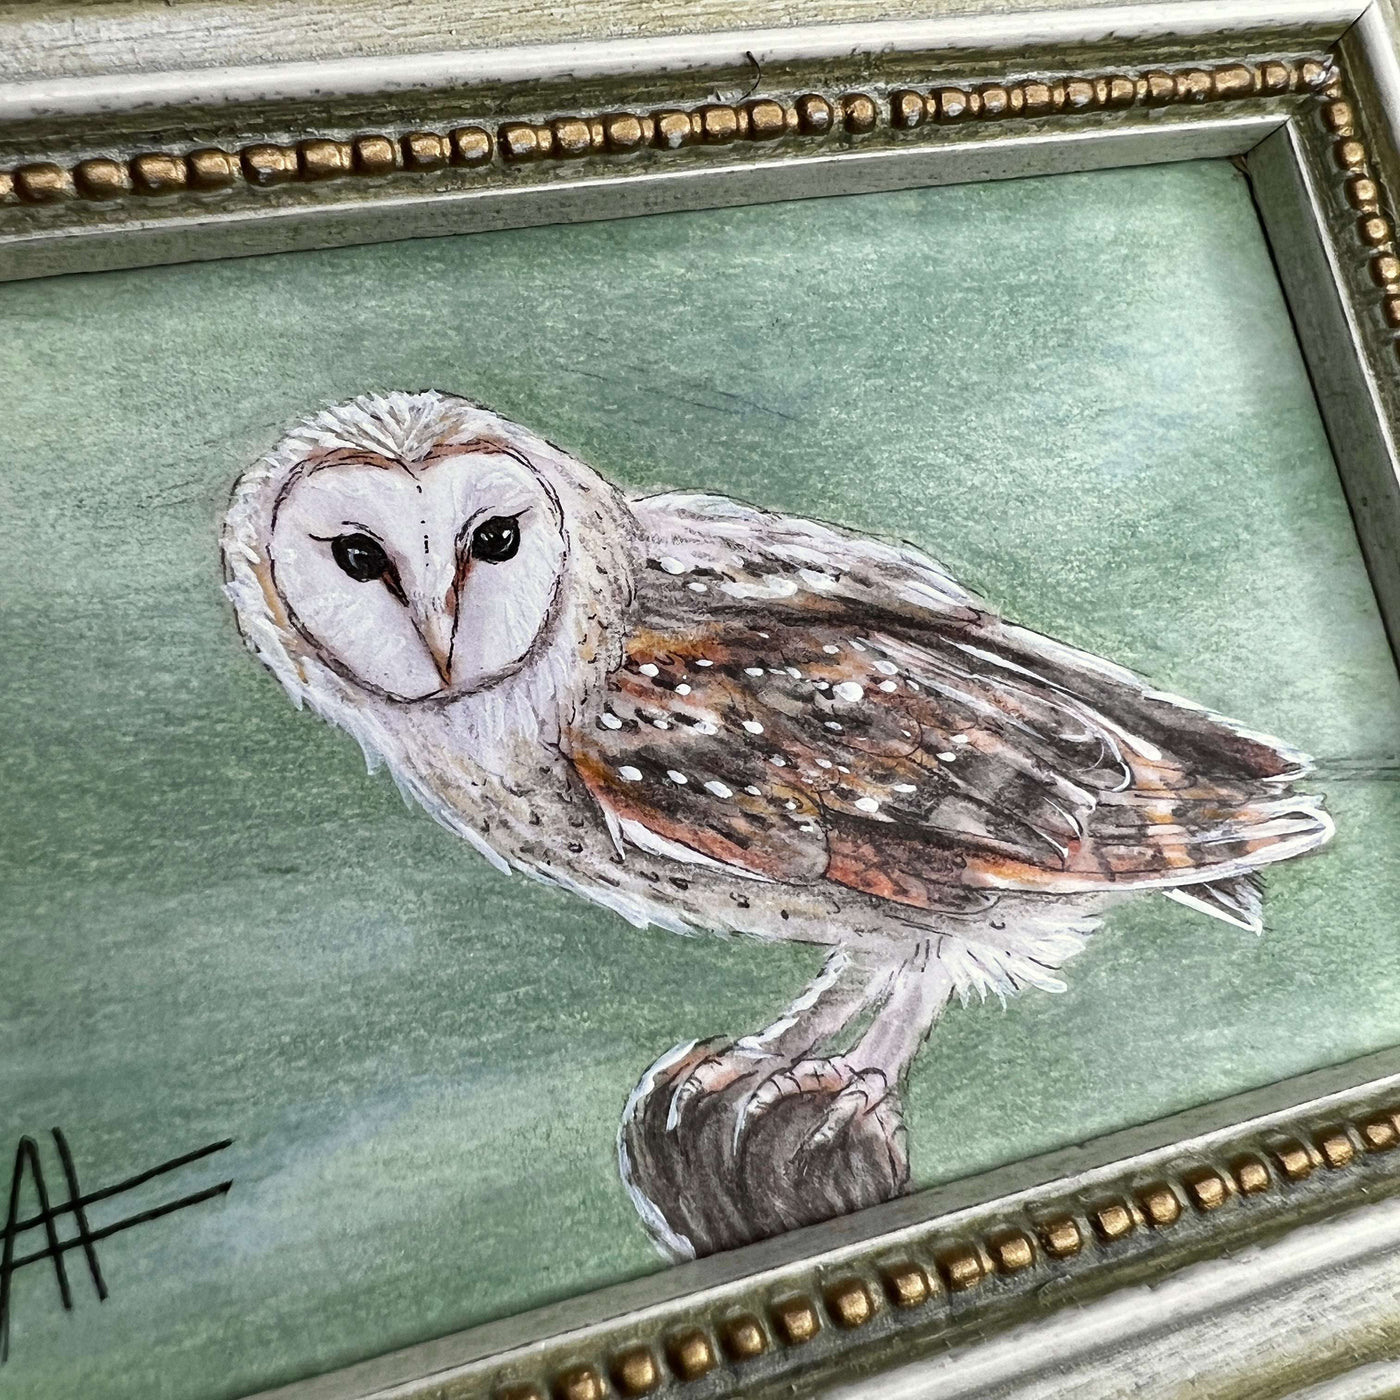 Zoom on owl painting in an ornate frame, highlighting its eyes and feathers.